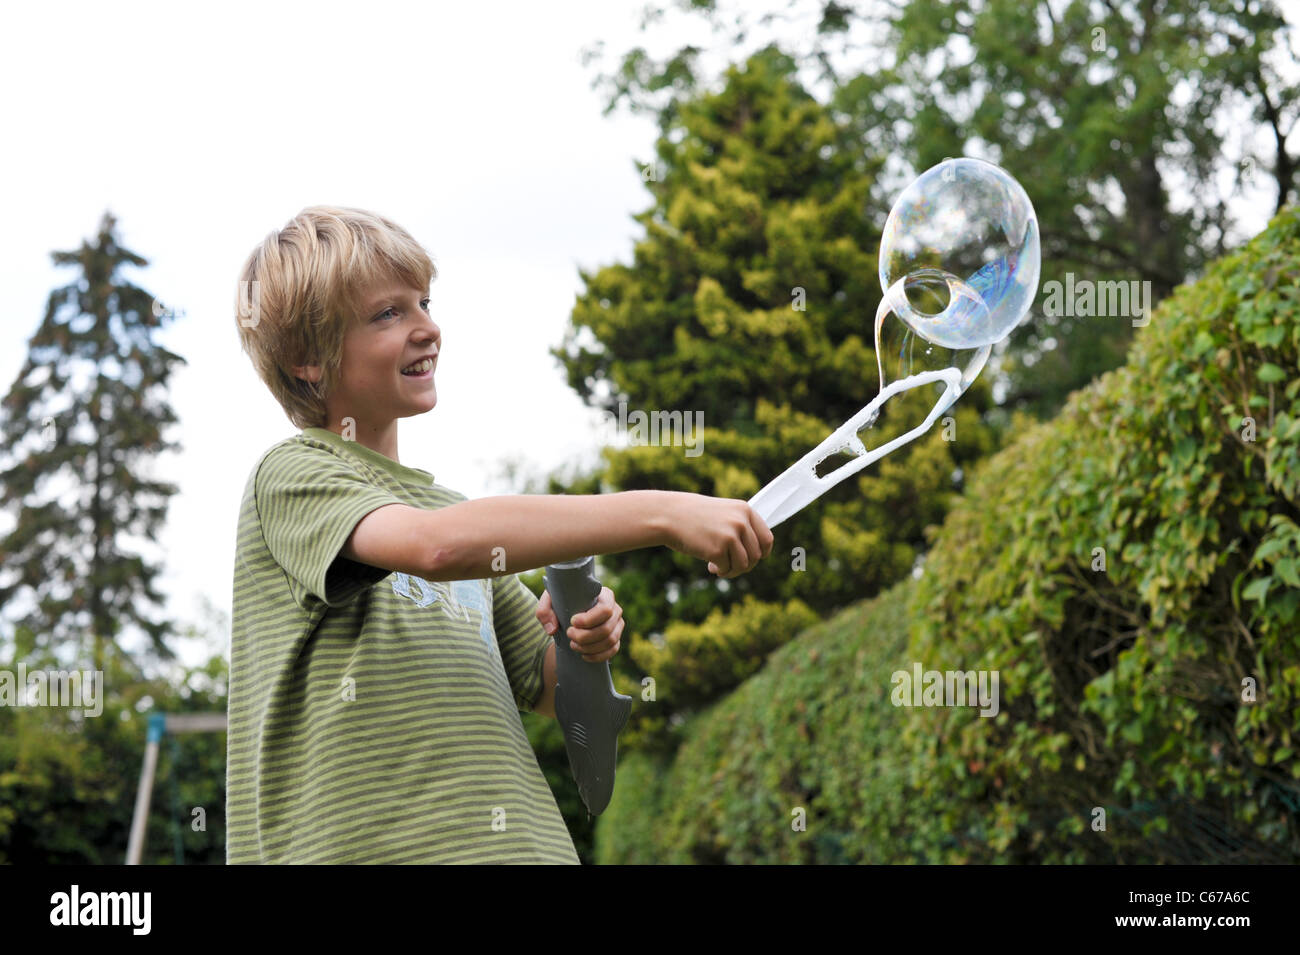 Happy and smiling blond-haired young boy blowing big bubbles in the garden on a summer's day Stock Photo